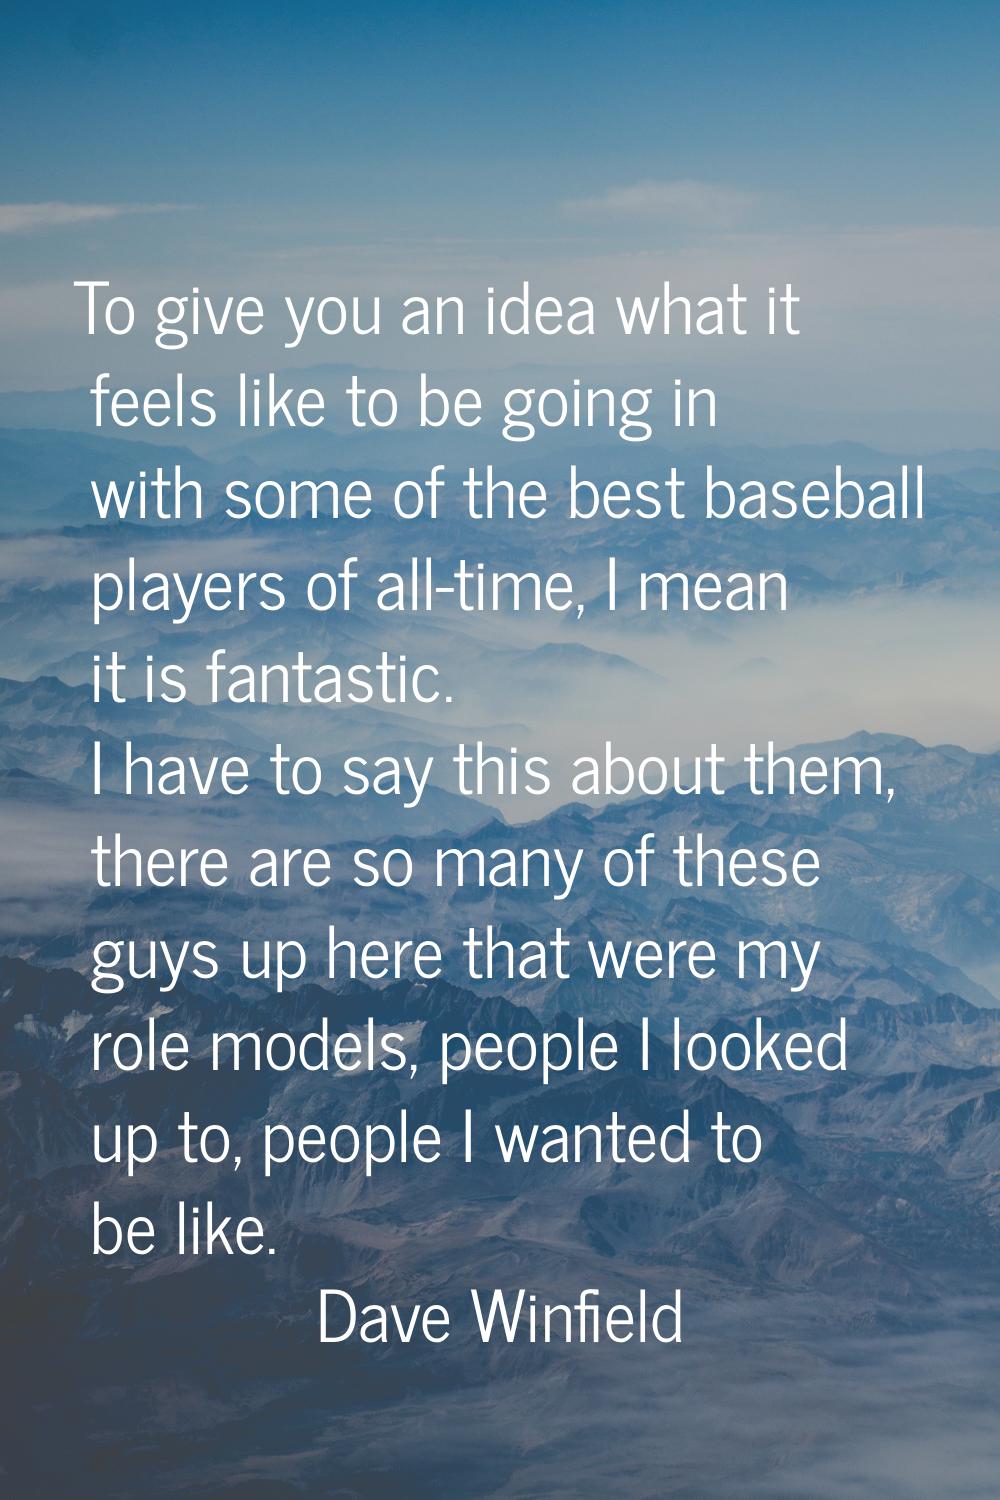 To give you an idea what it feels like to be going in with some of the best baseball players of all